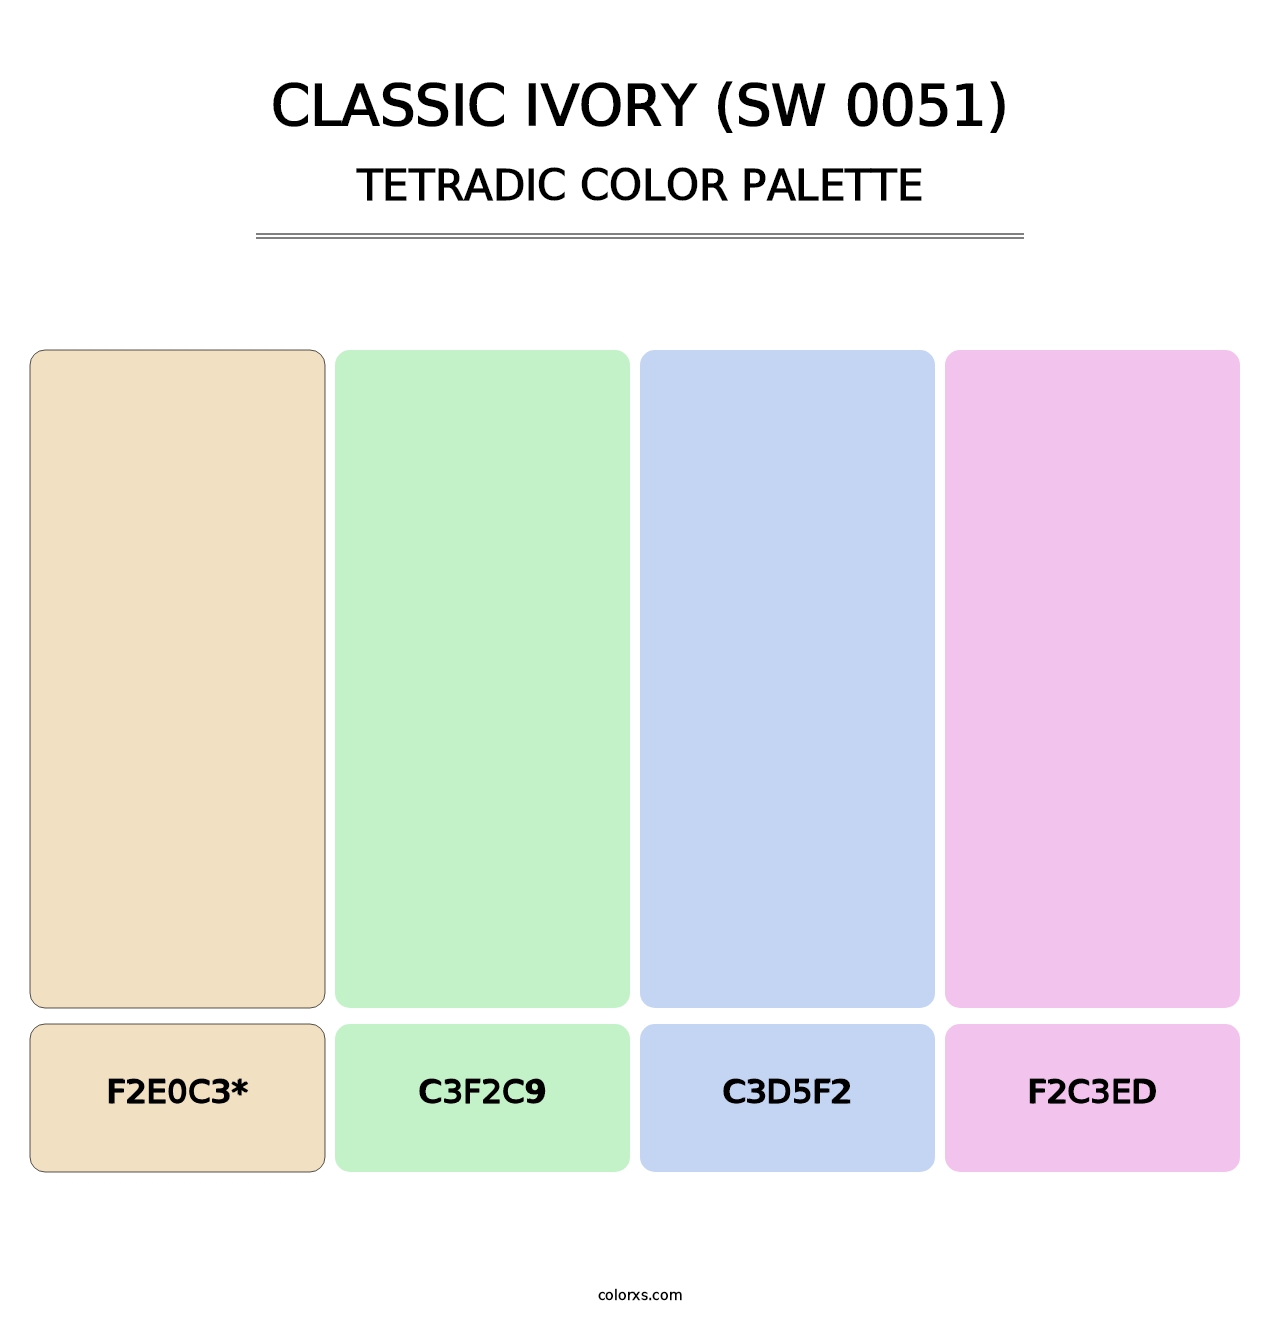 Classic Ivory (SW 0051) - Tetradic Color Palette